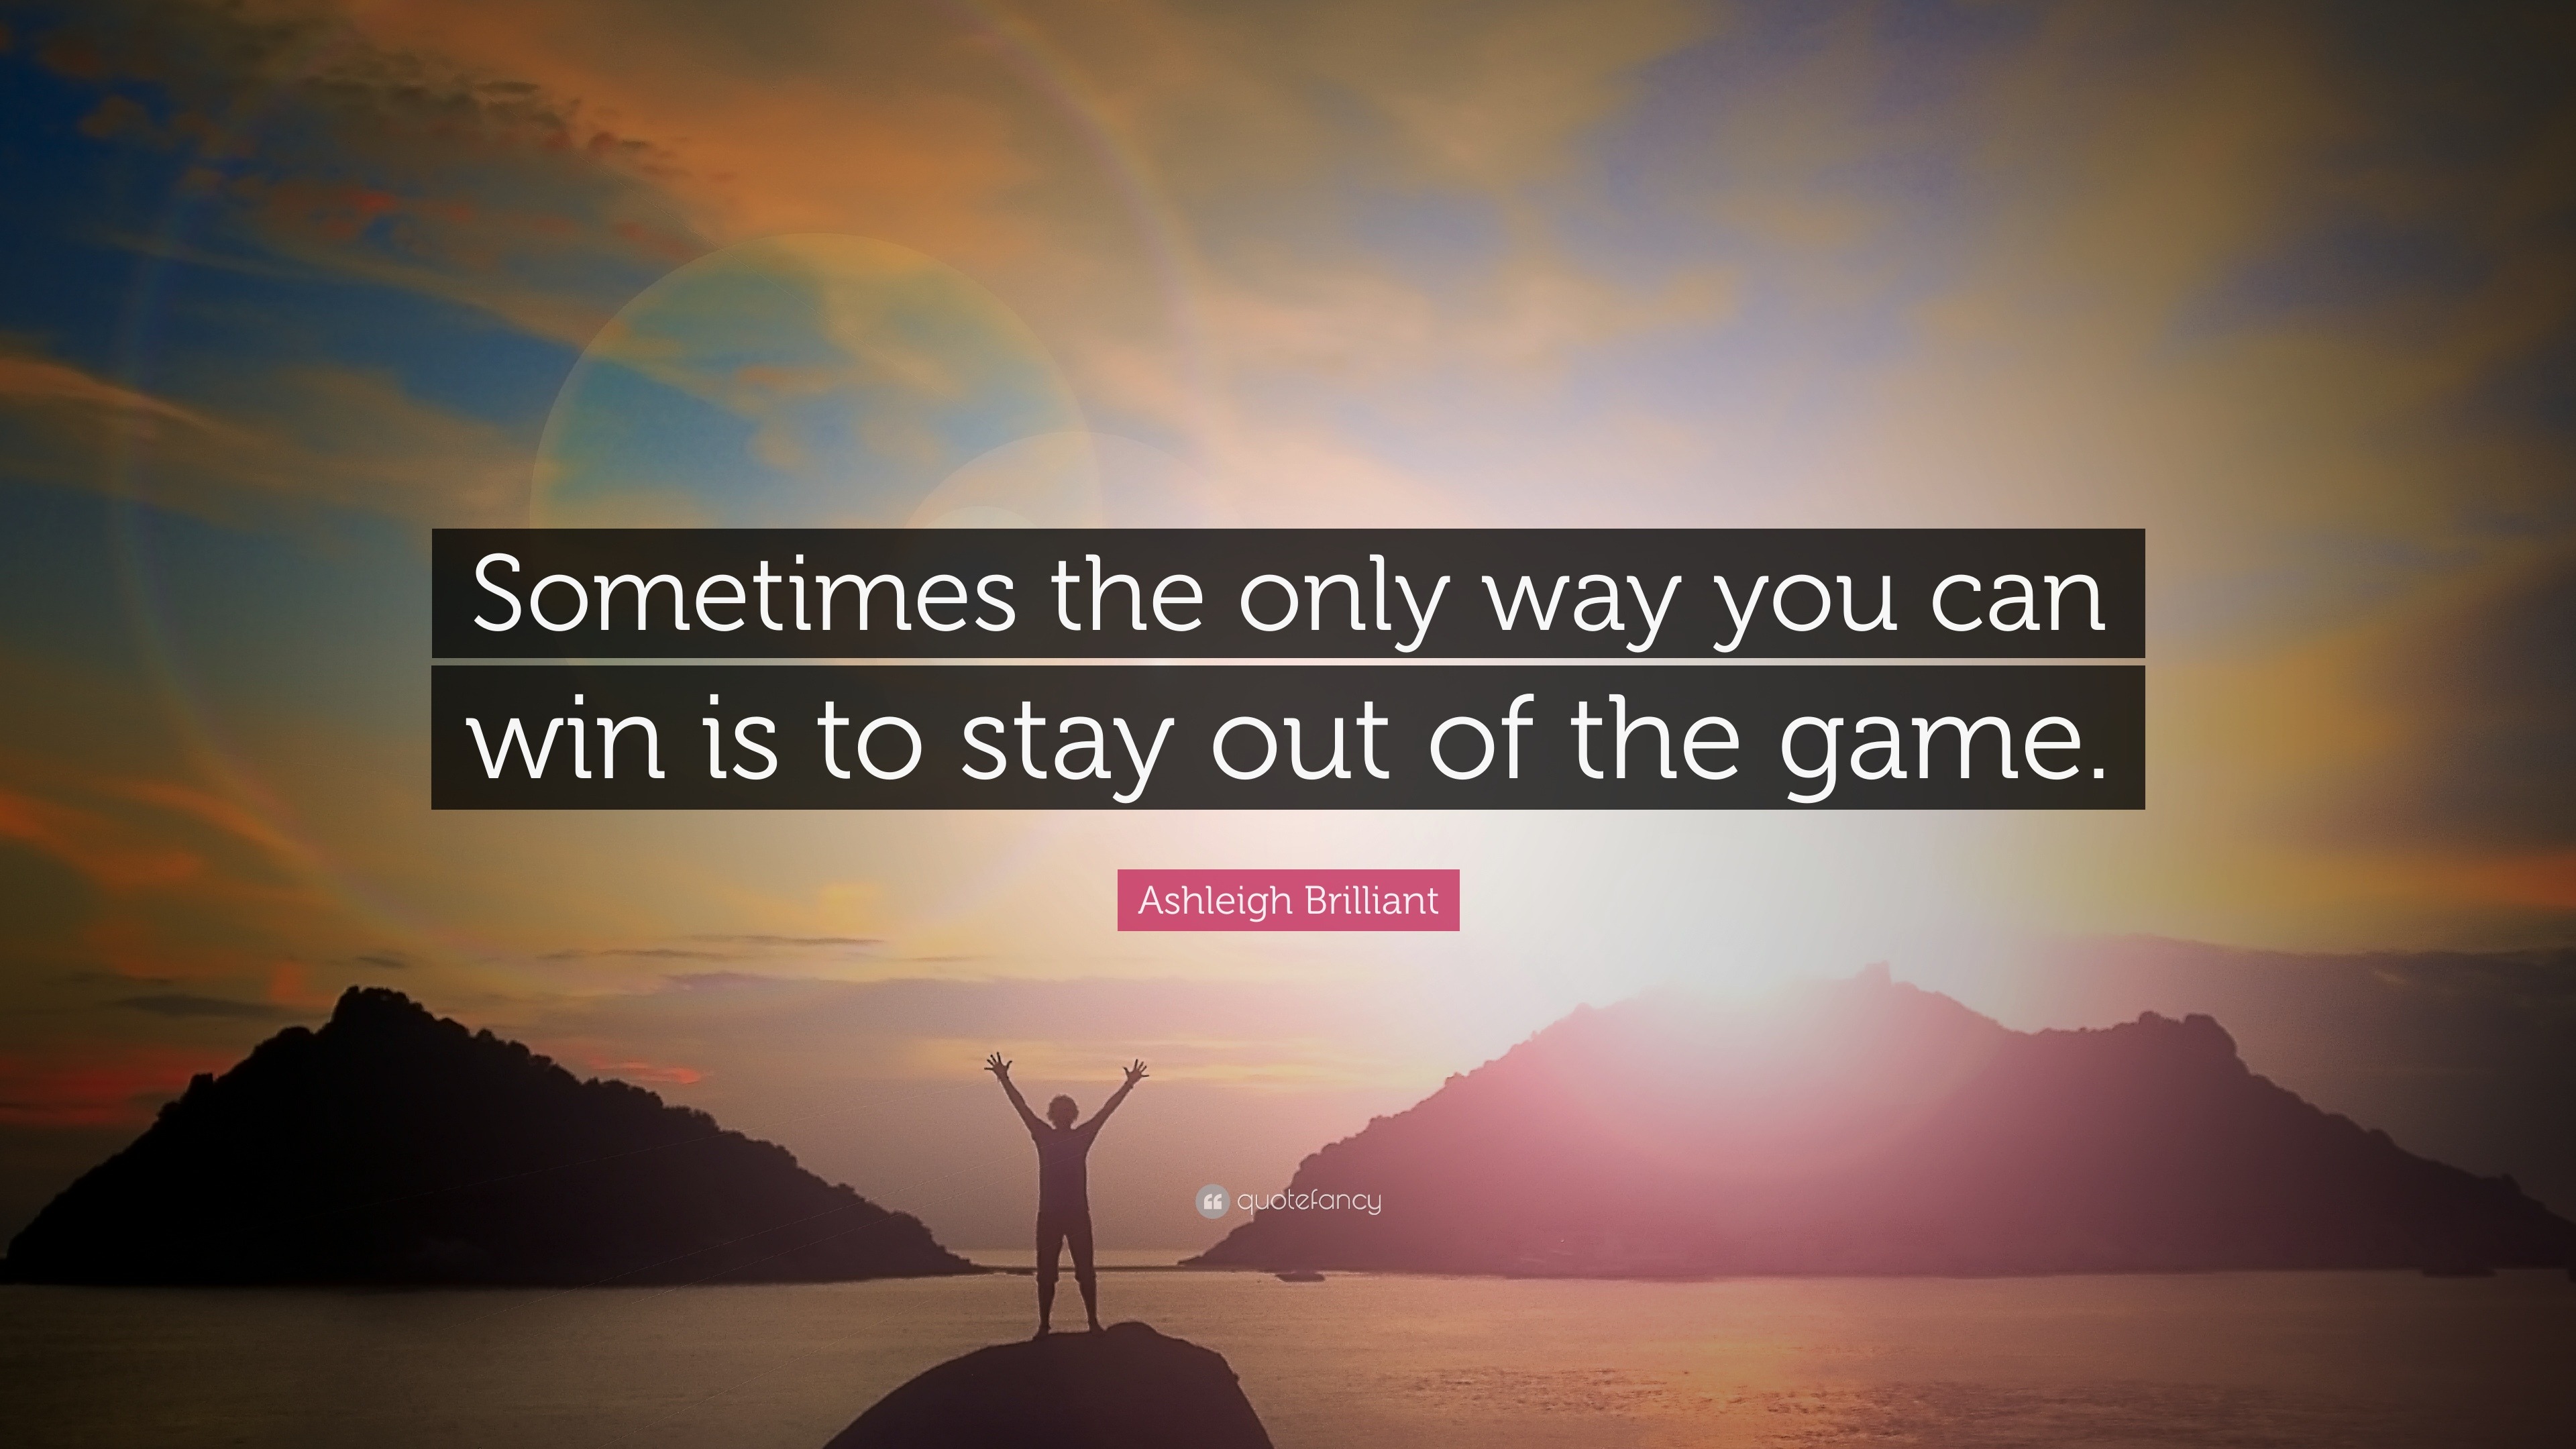 Ashleigh Brilliant Quote: “Life is the only game in which the